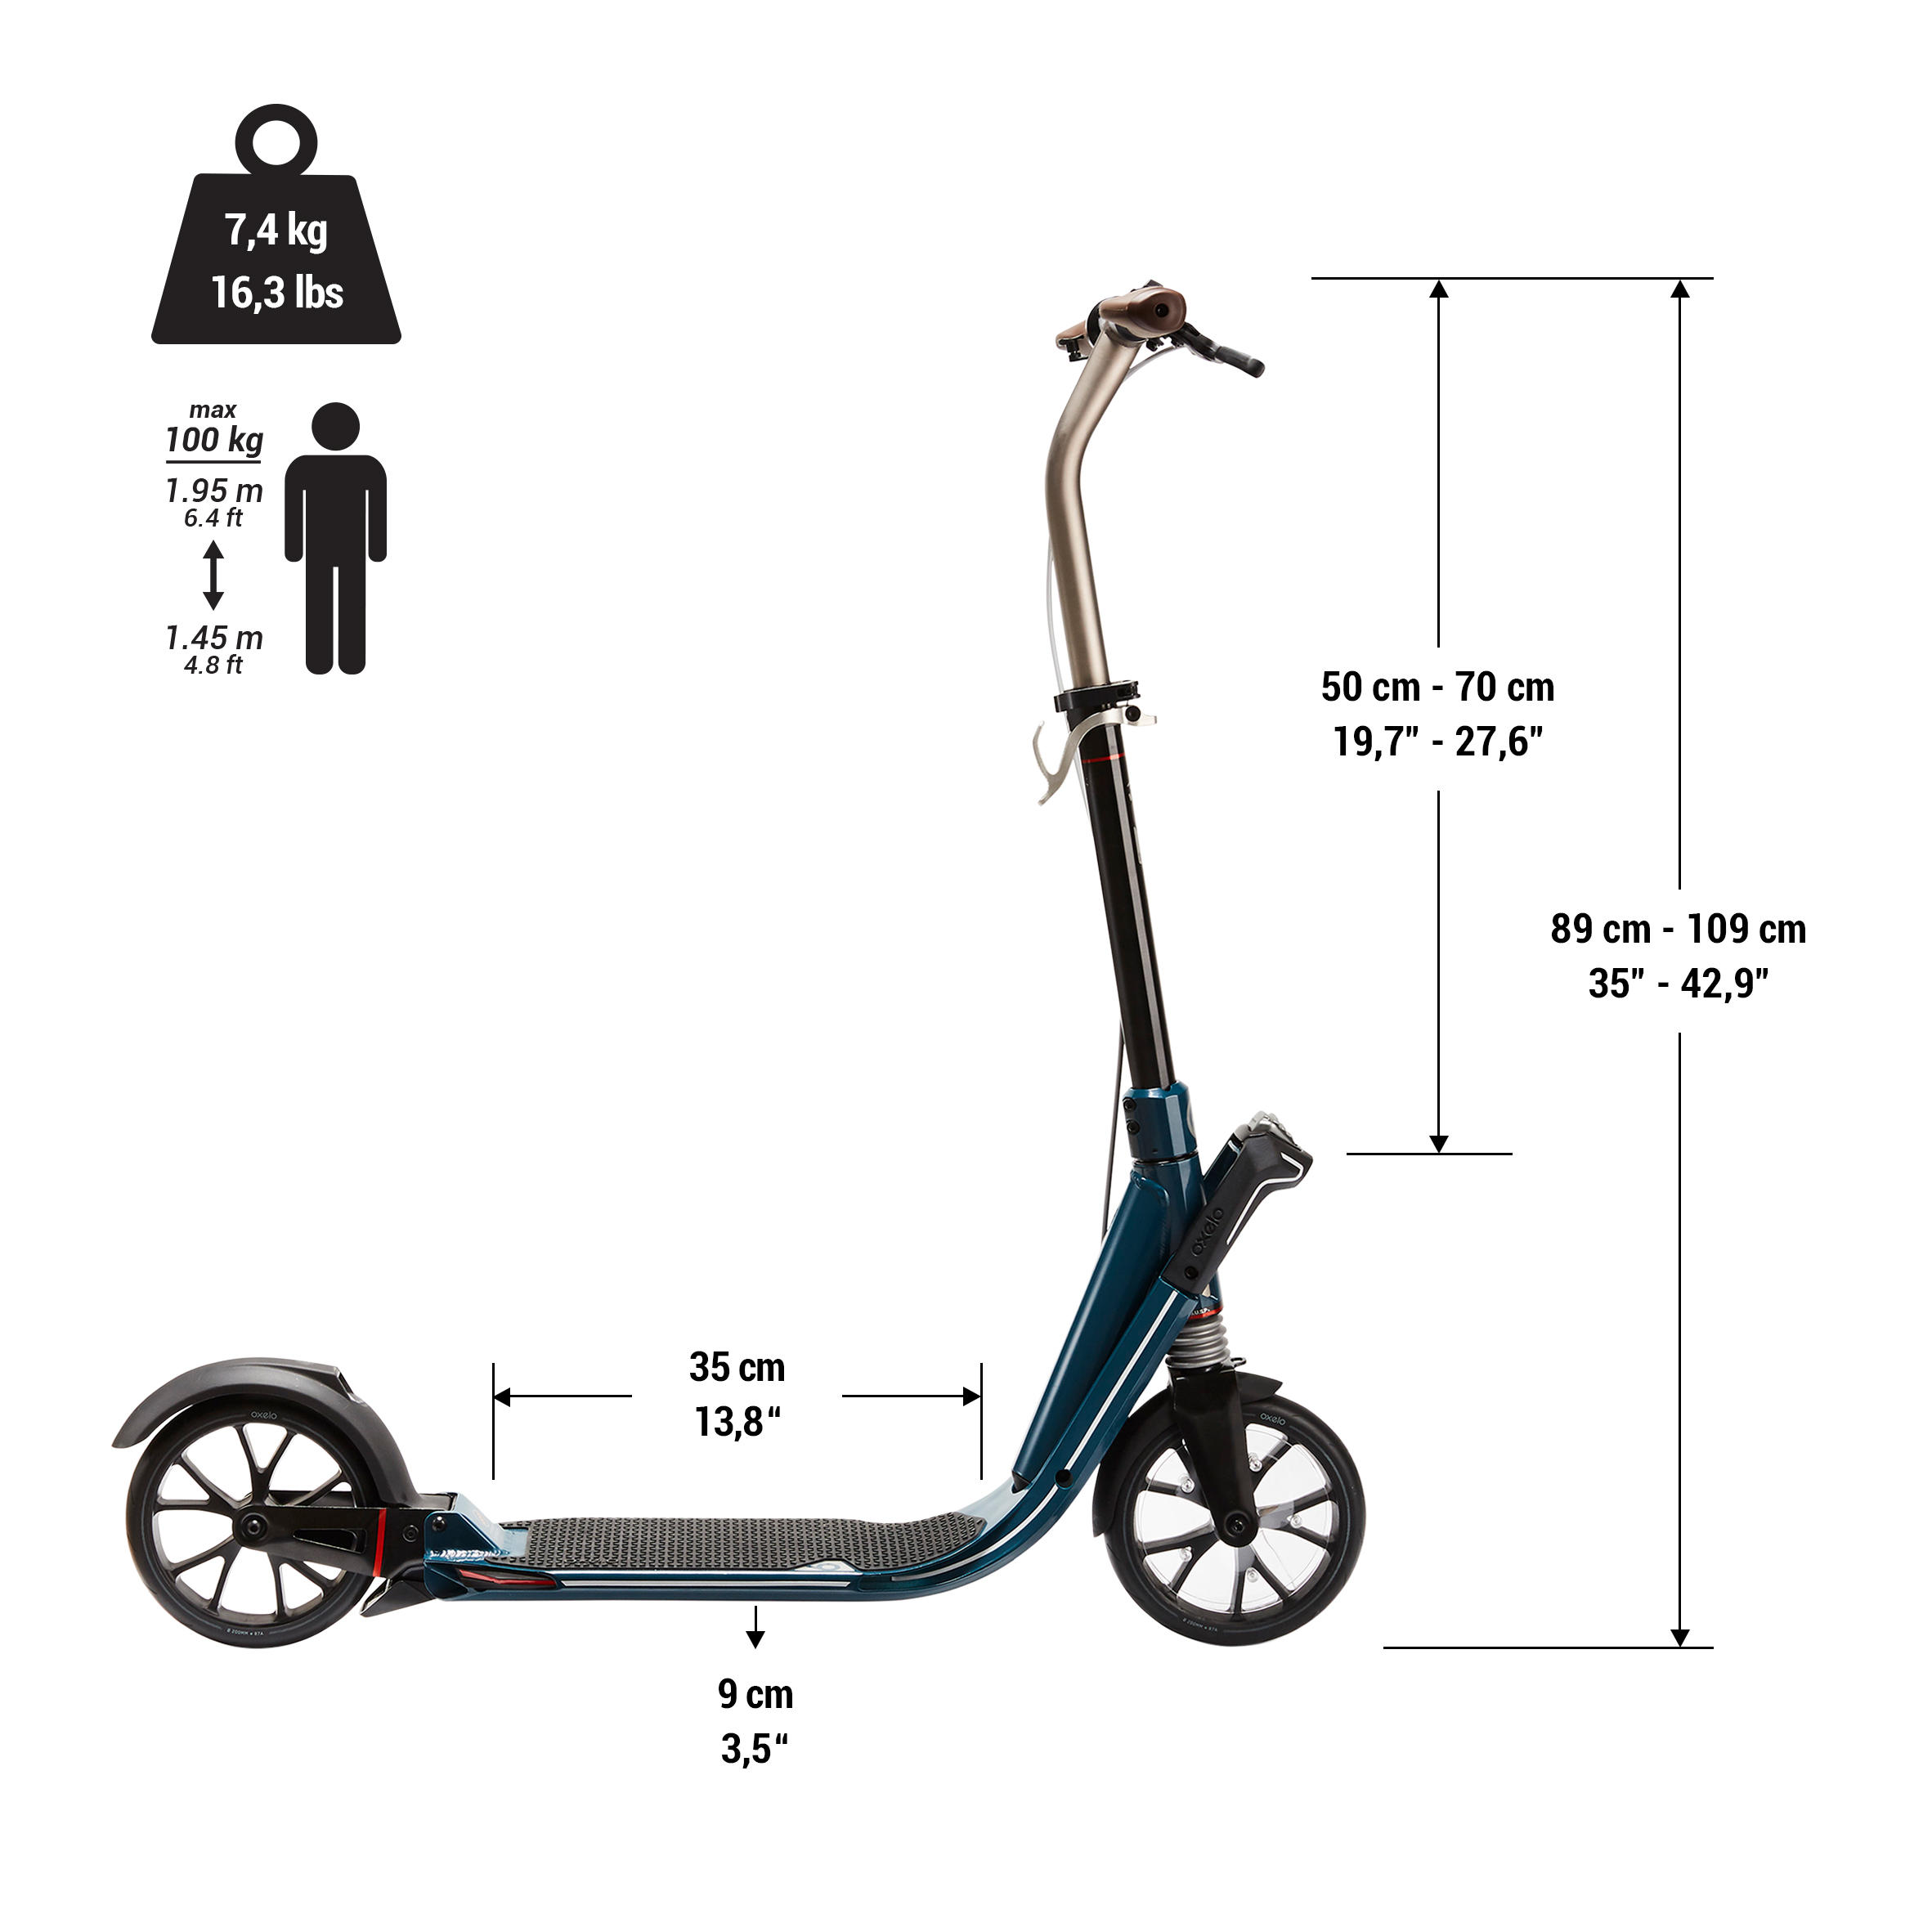 Town 9 EF V2 Adult Scooter OXELO 